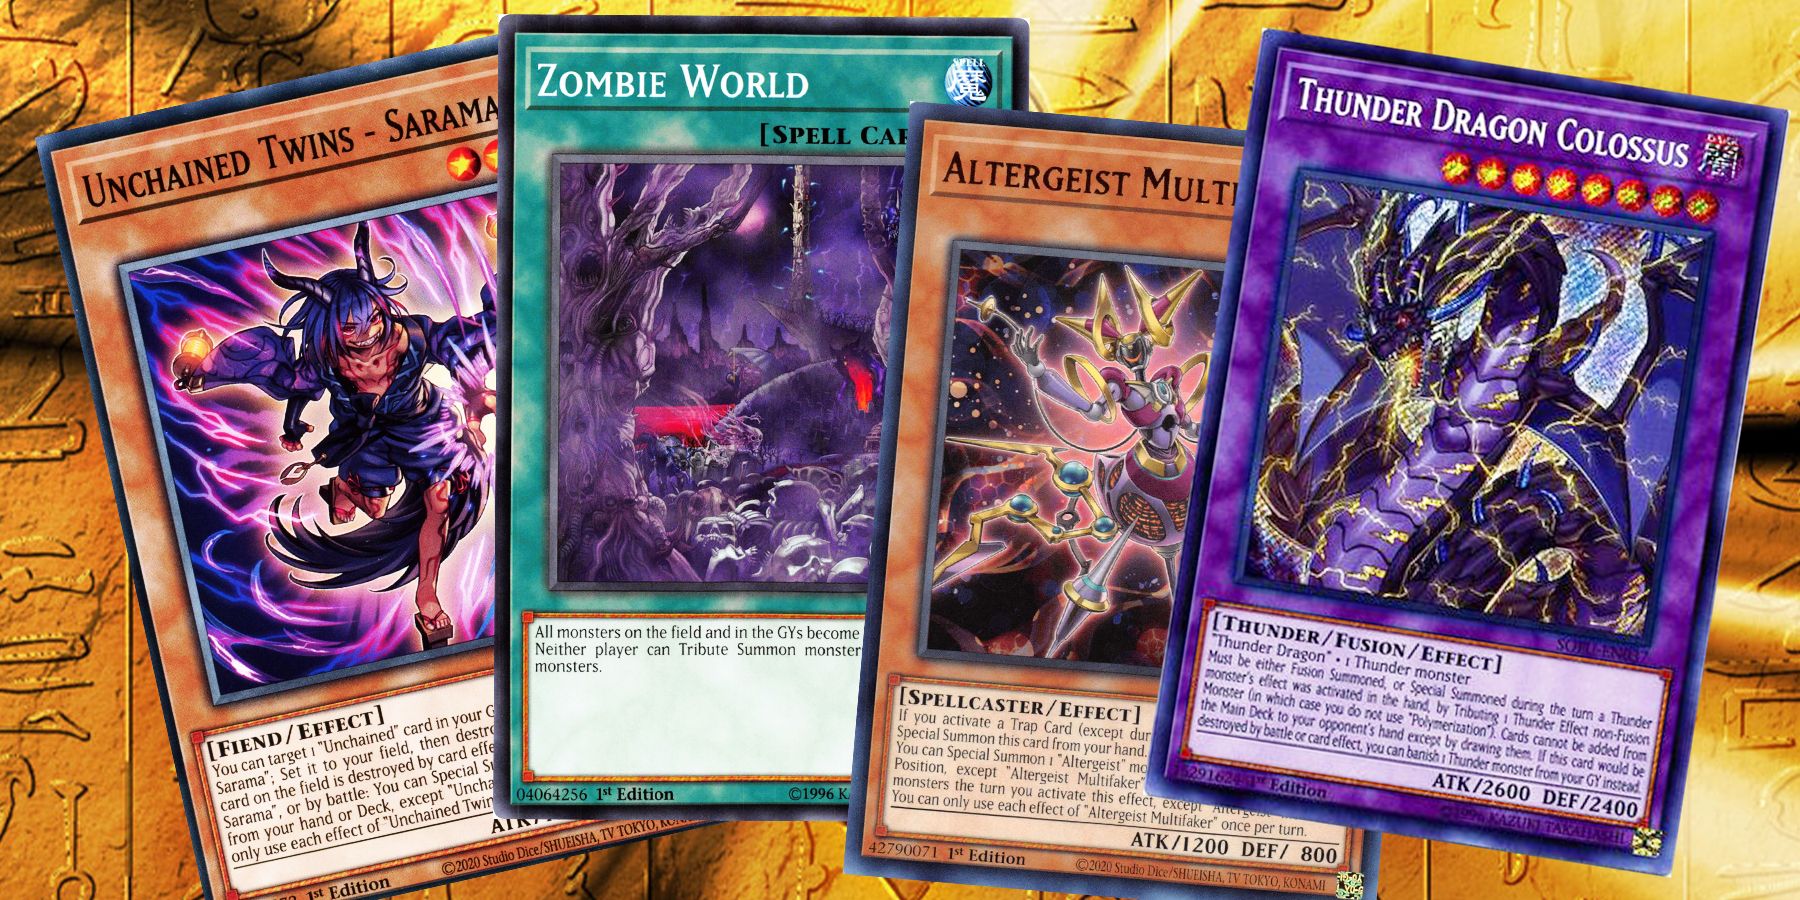 Four Yu Gi Oh cards are stacked on one another. From left to right: Unchained Twins- Sarama, Zombie World, Altergeist Multifaker, and Thunder Dragon Colossus. 